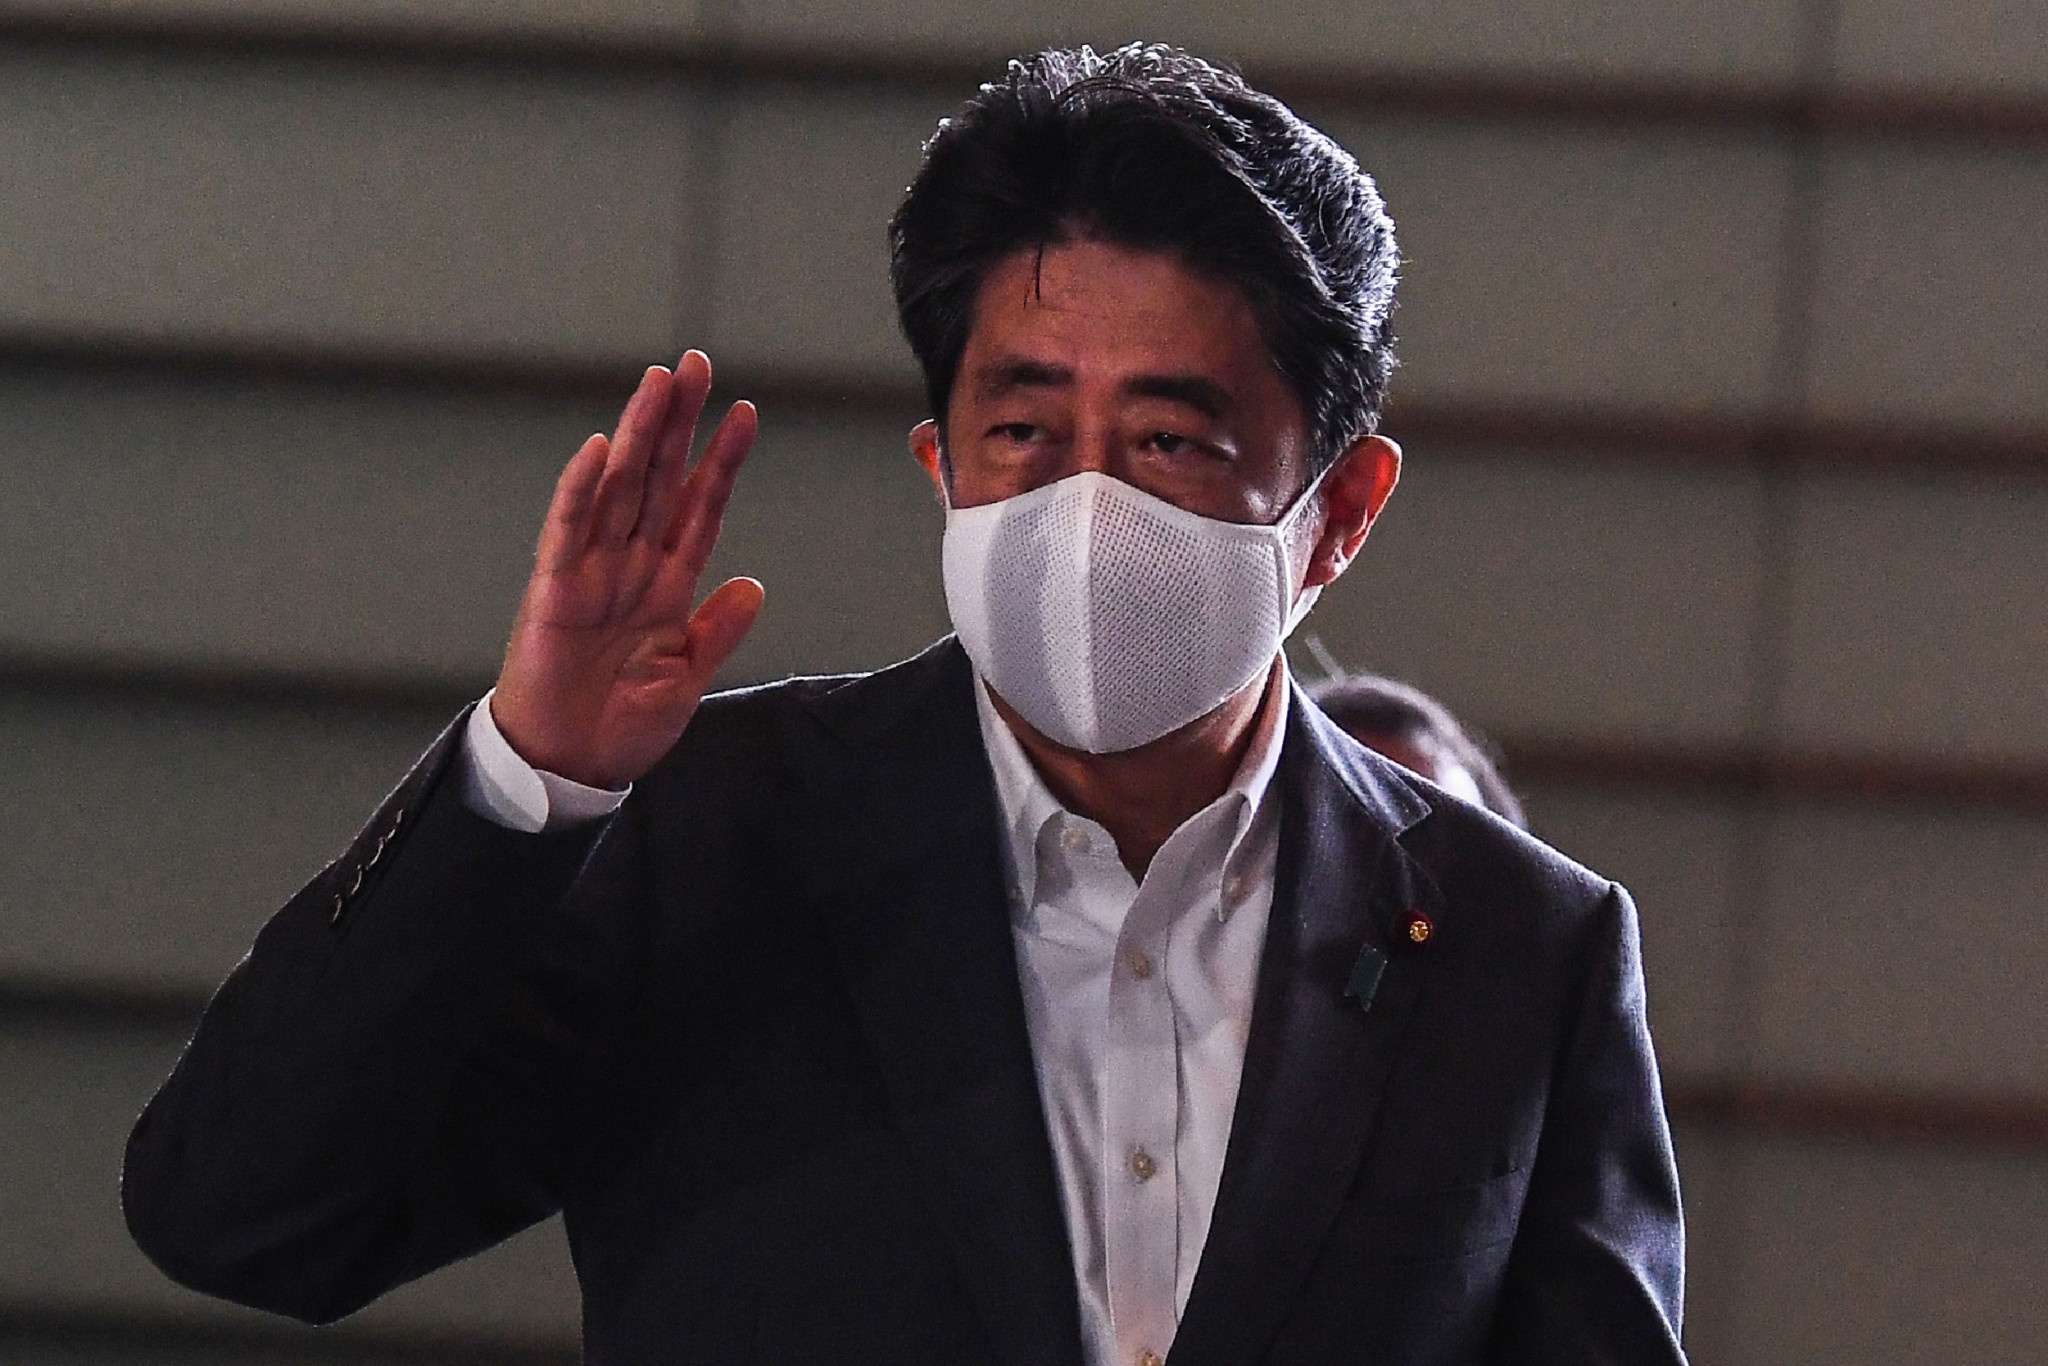 Liberal Democratic Party to vote on successor for Japanese Prime Minister Abe on September 14